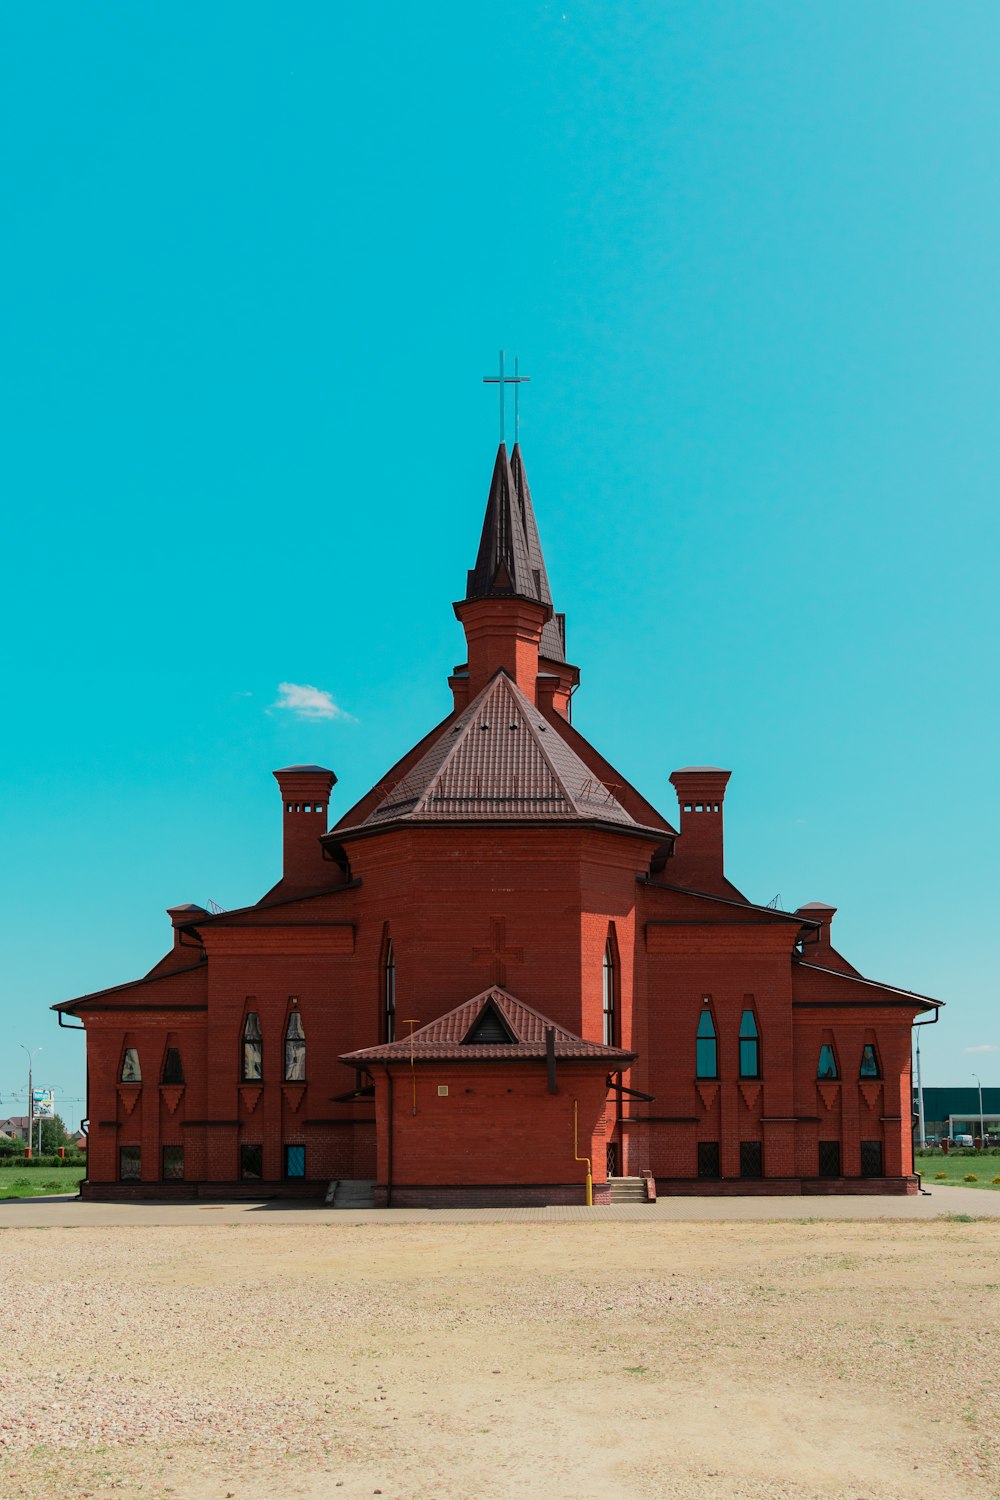 a large red brick building with a steeple on top